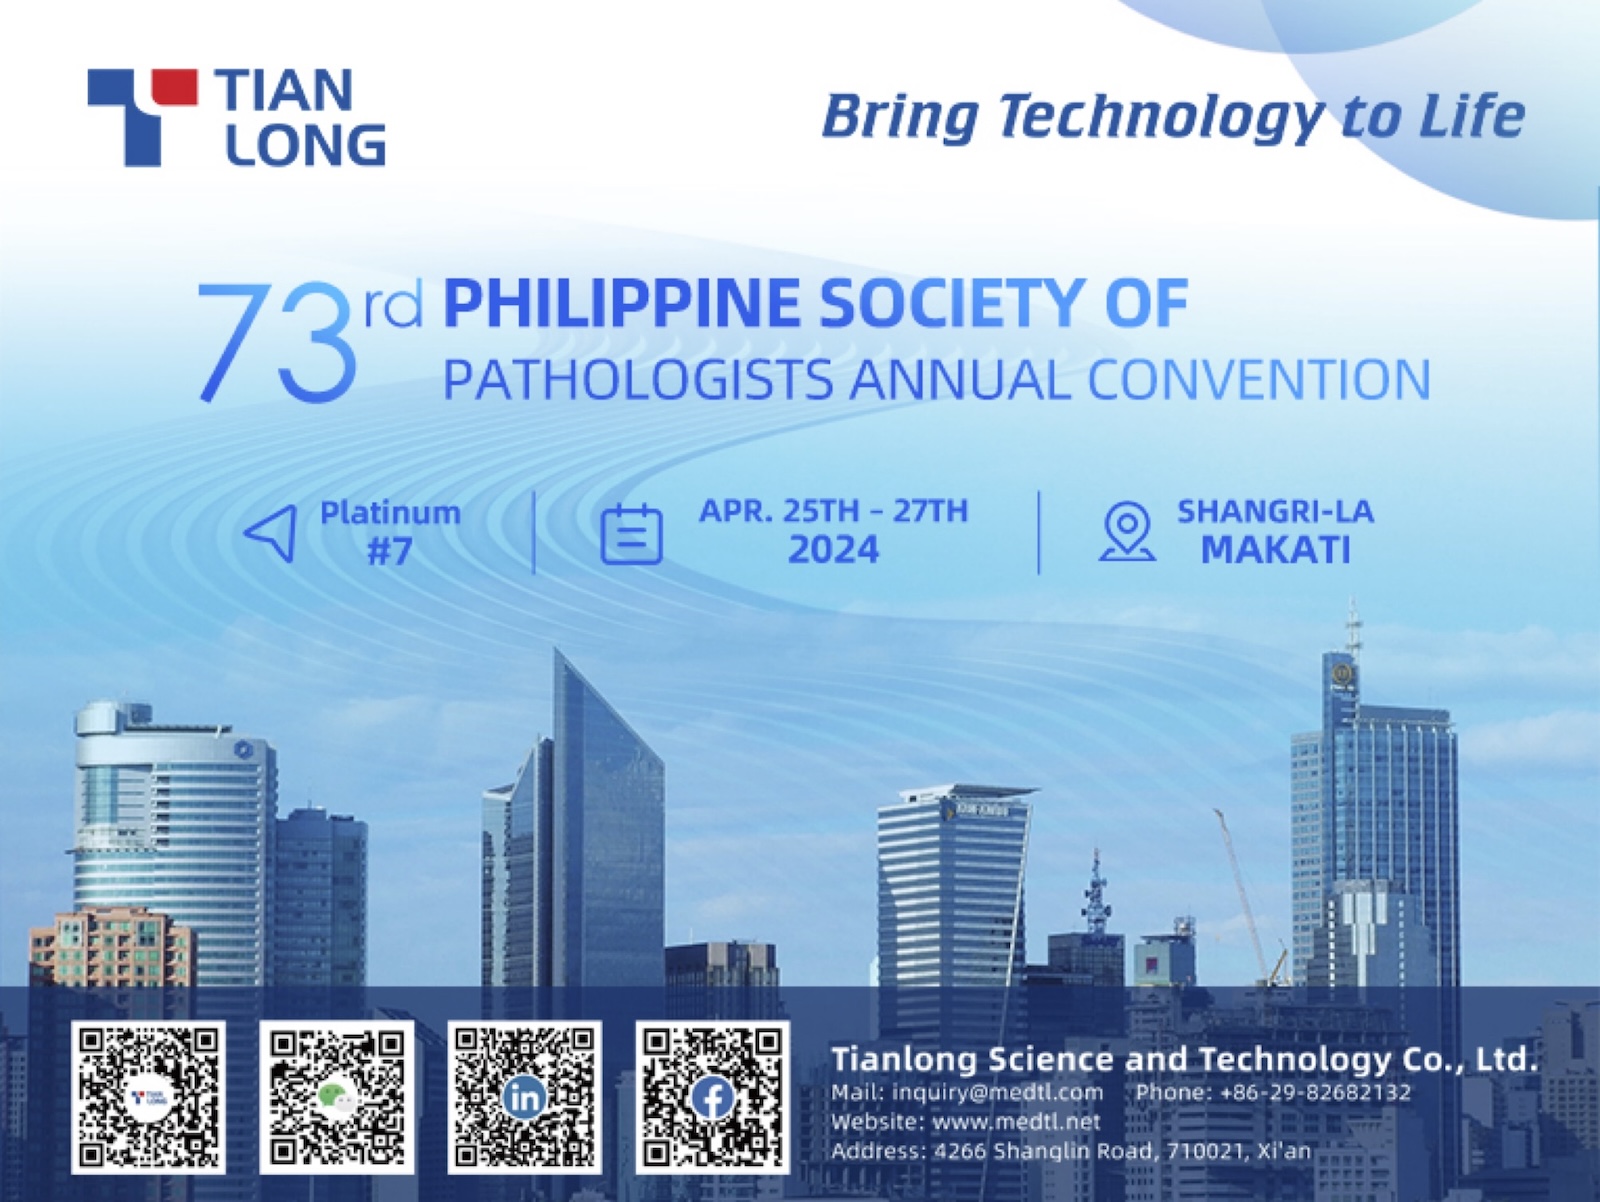 Meet TianLong at the 73rd Annual Convention of Philippine Society of Pathologist